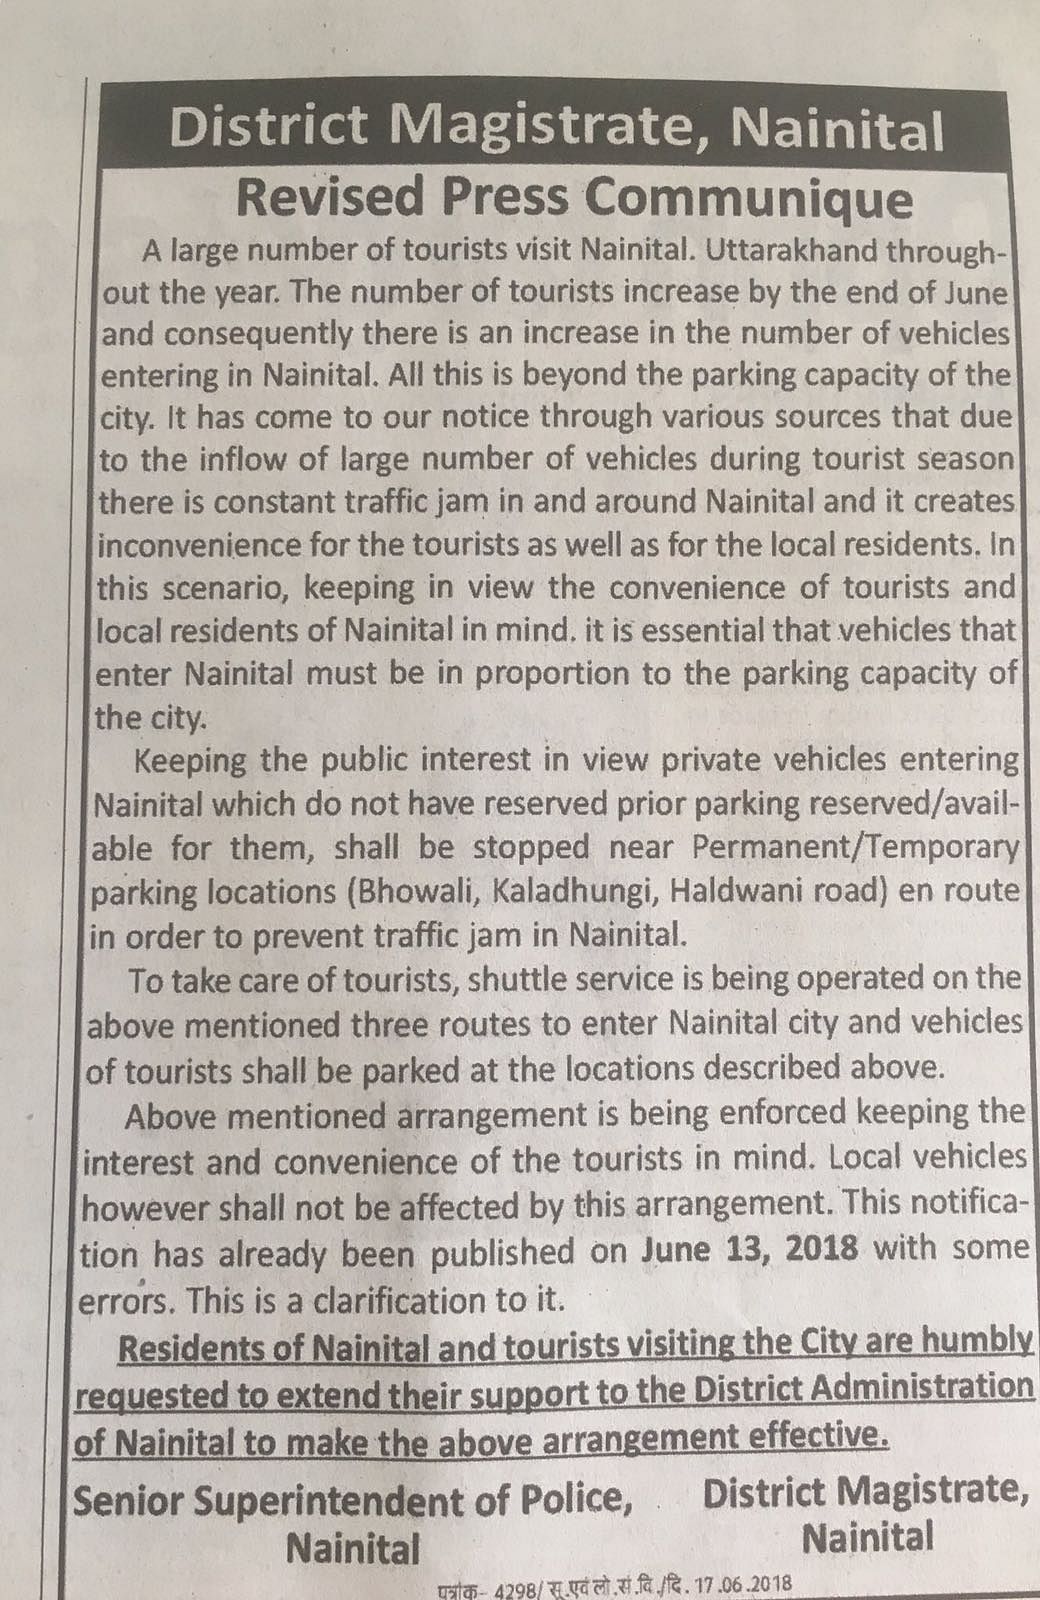 Nainital took this step in order to reduce the heavy congestion caused by tourist vehicles in and around the city.